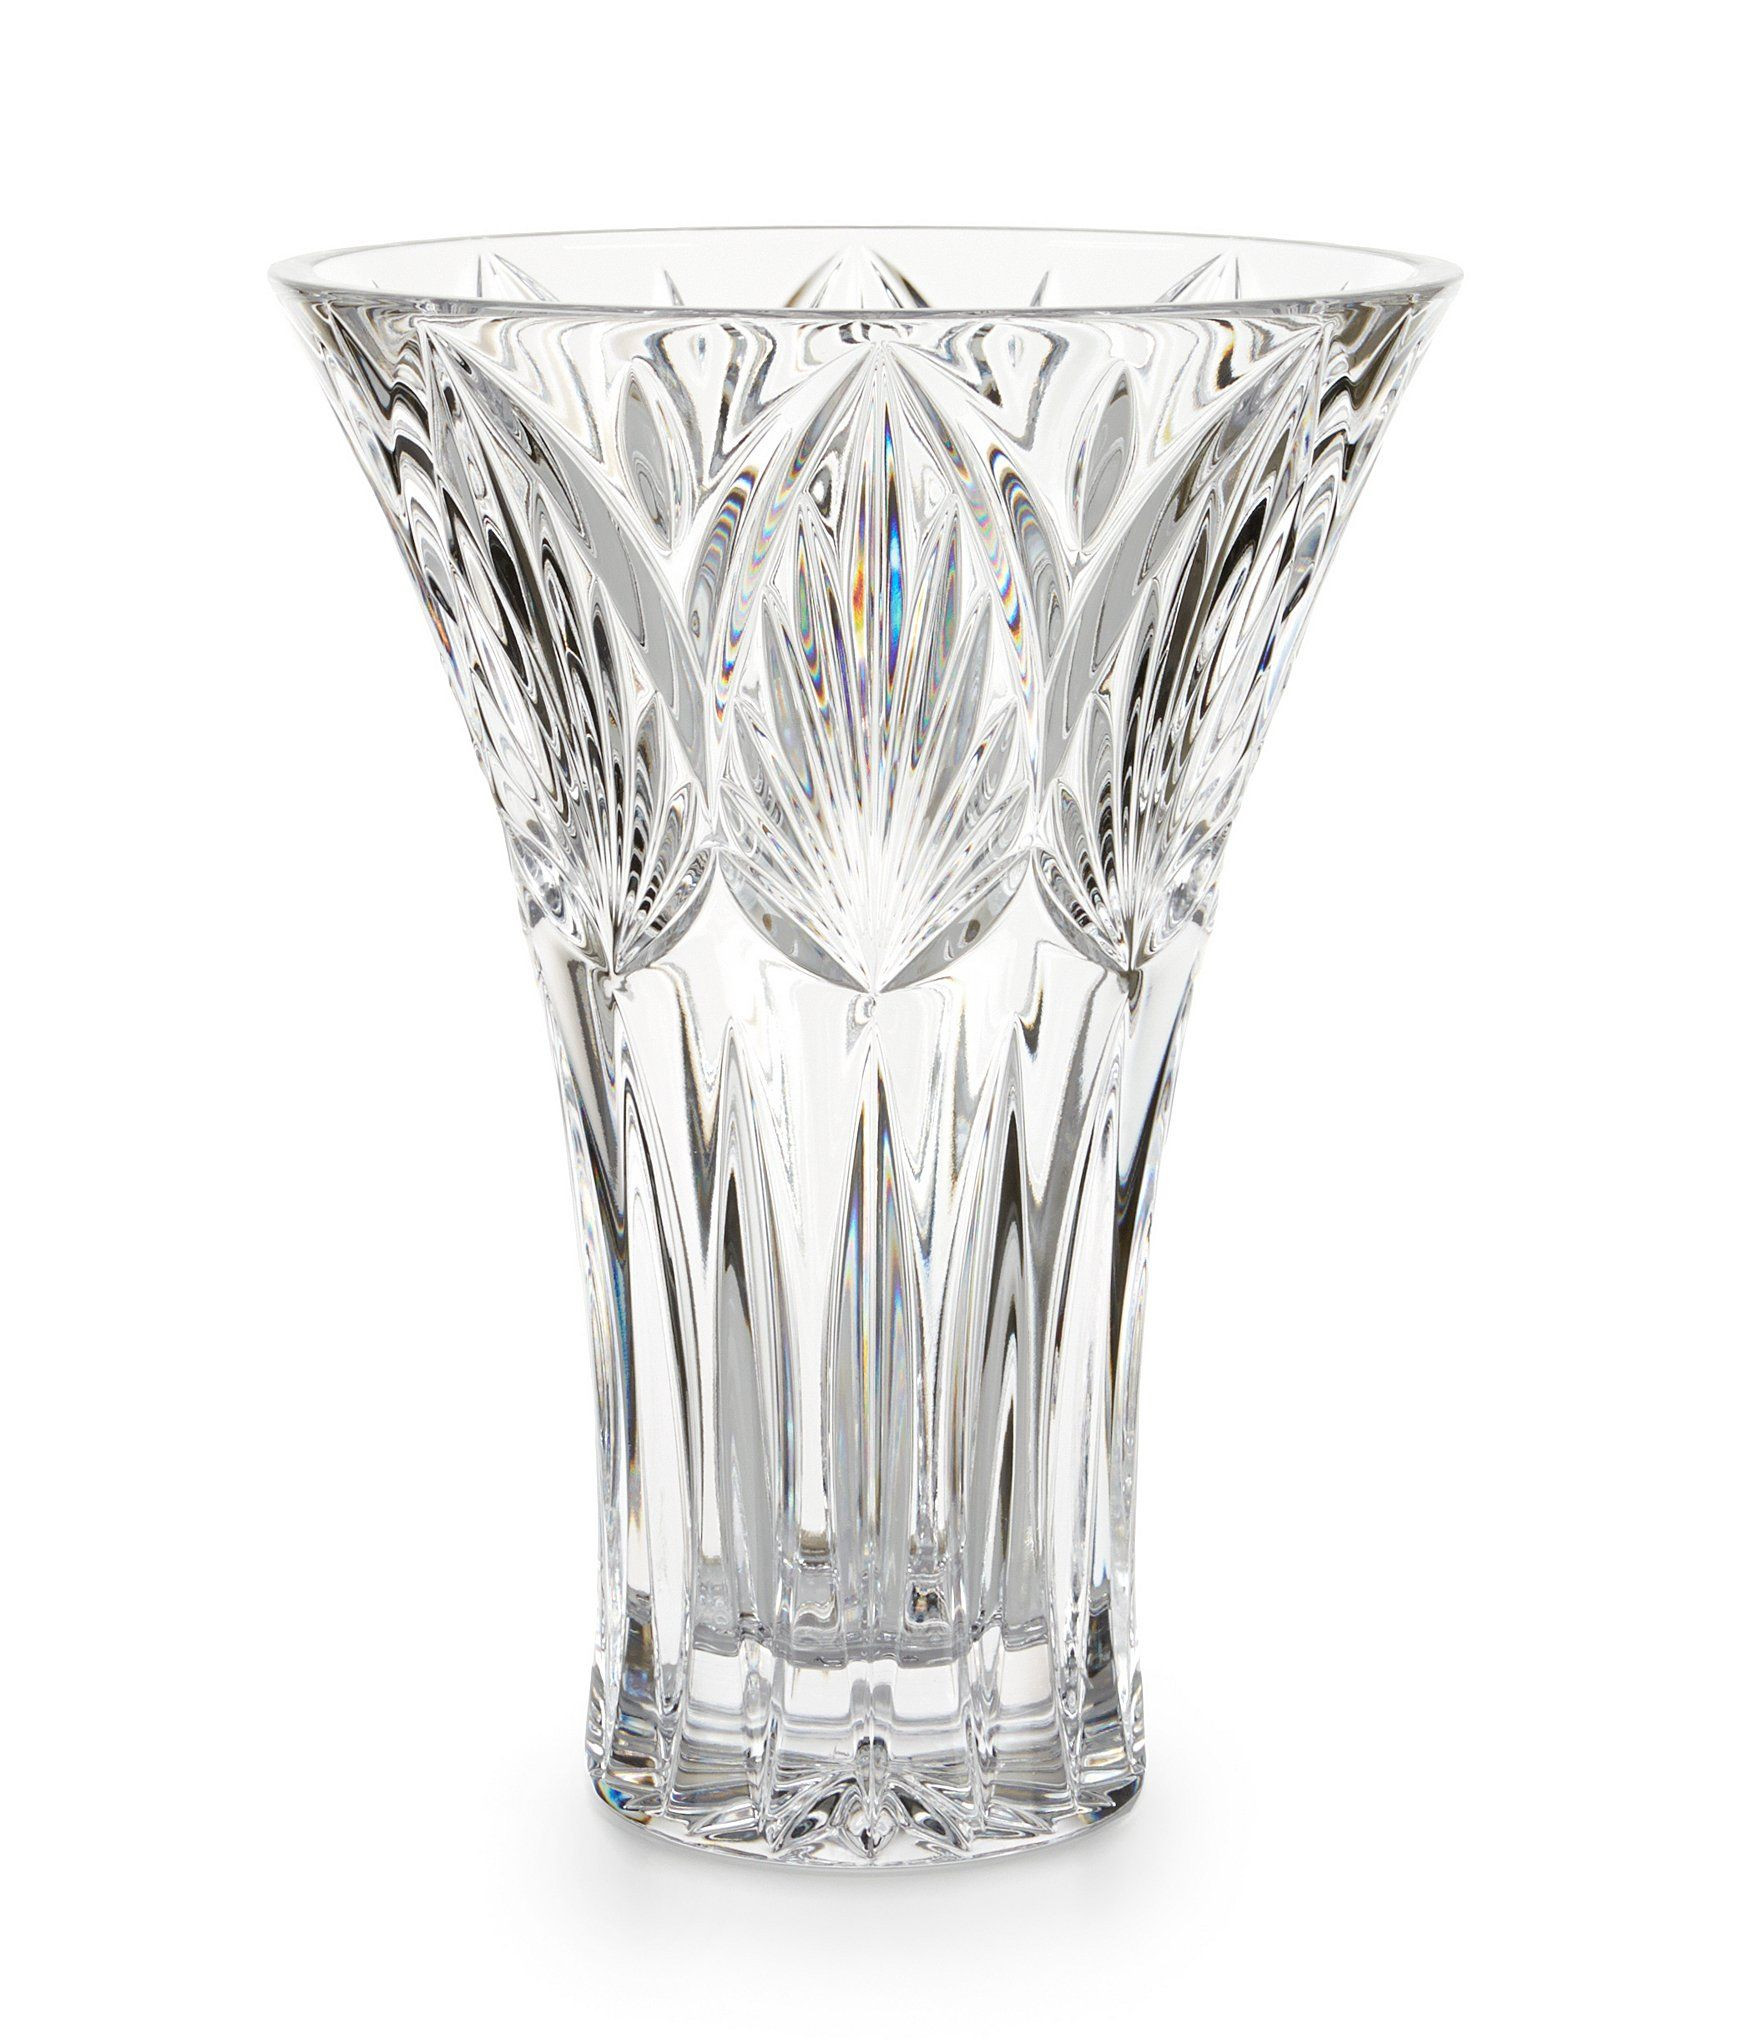 giant martini glass vase of waterford westbridge crystal vase crystal vase dillards and crystals in waterford westbridge crystal vase dillards